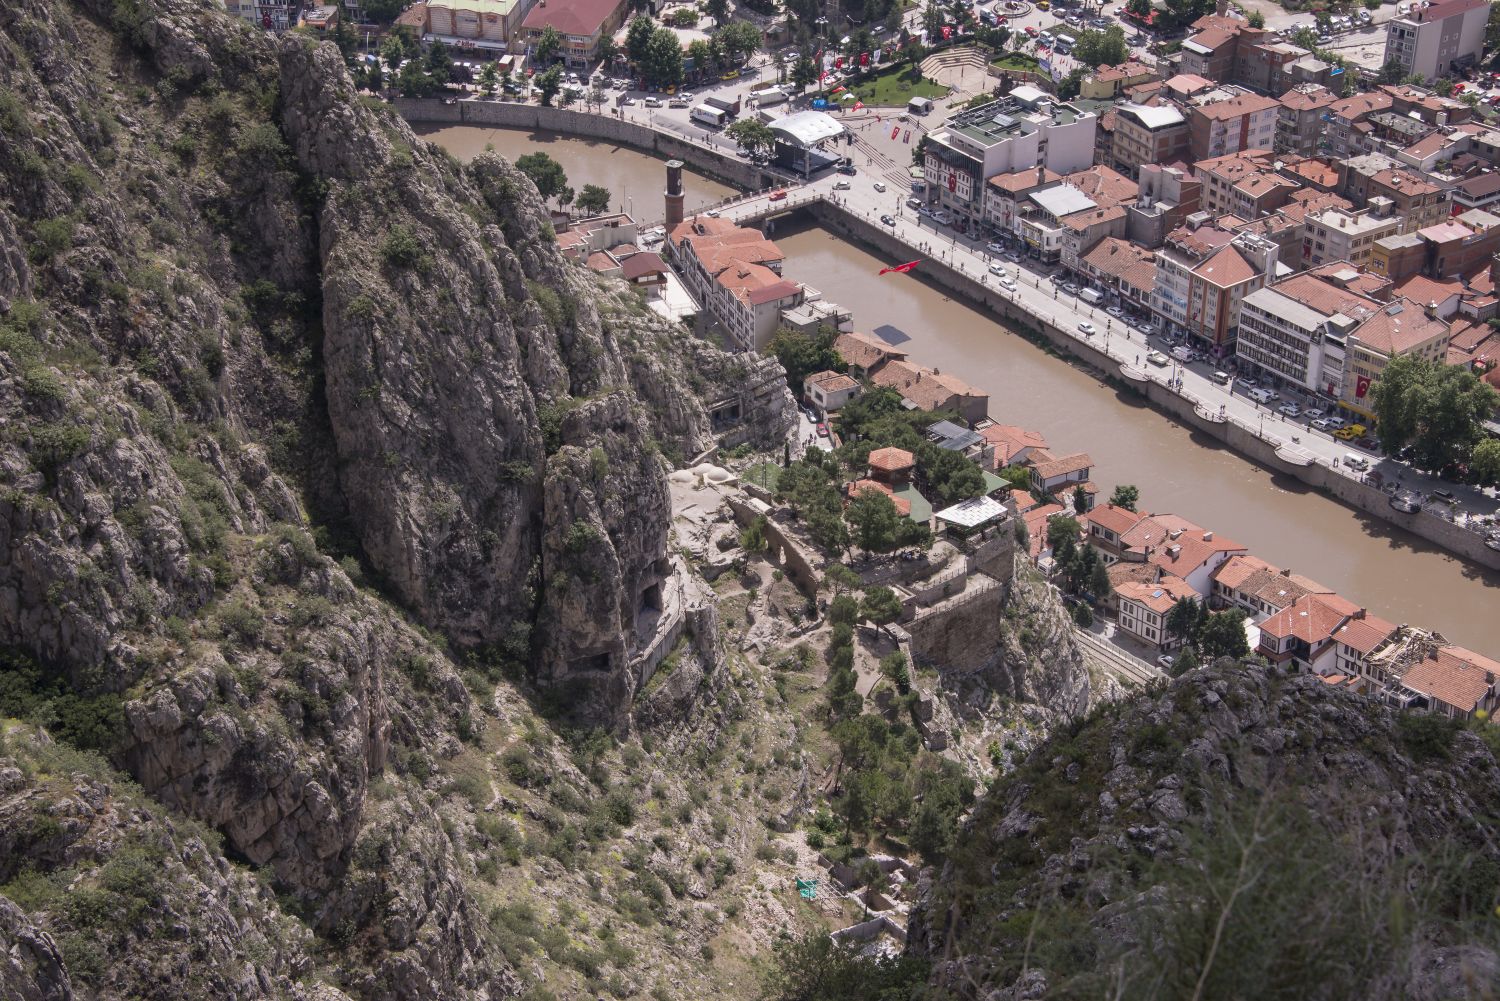 Amasya  - View over central part of Amasya, Turkey, from citadel atop&nbsp;Harşena Mount.